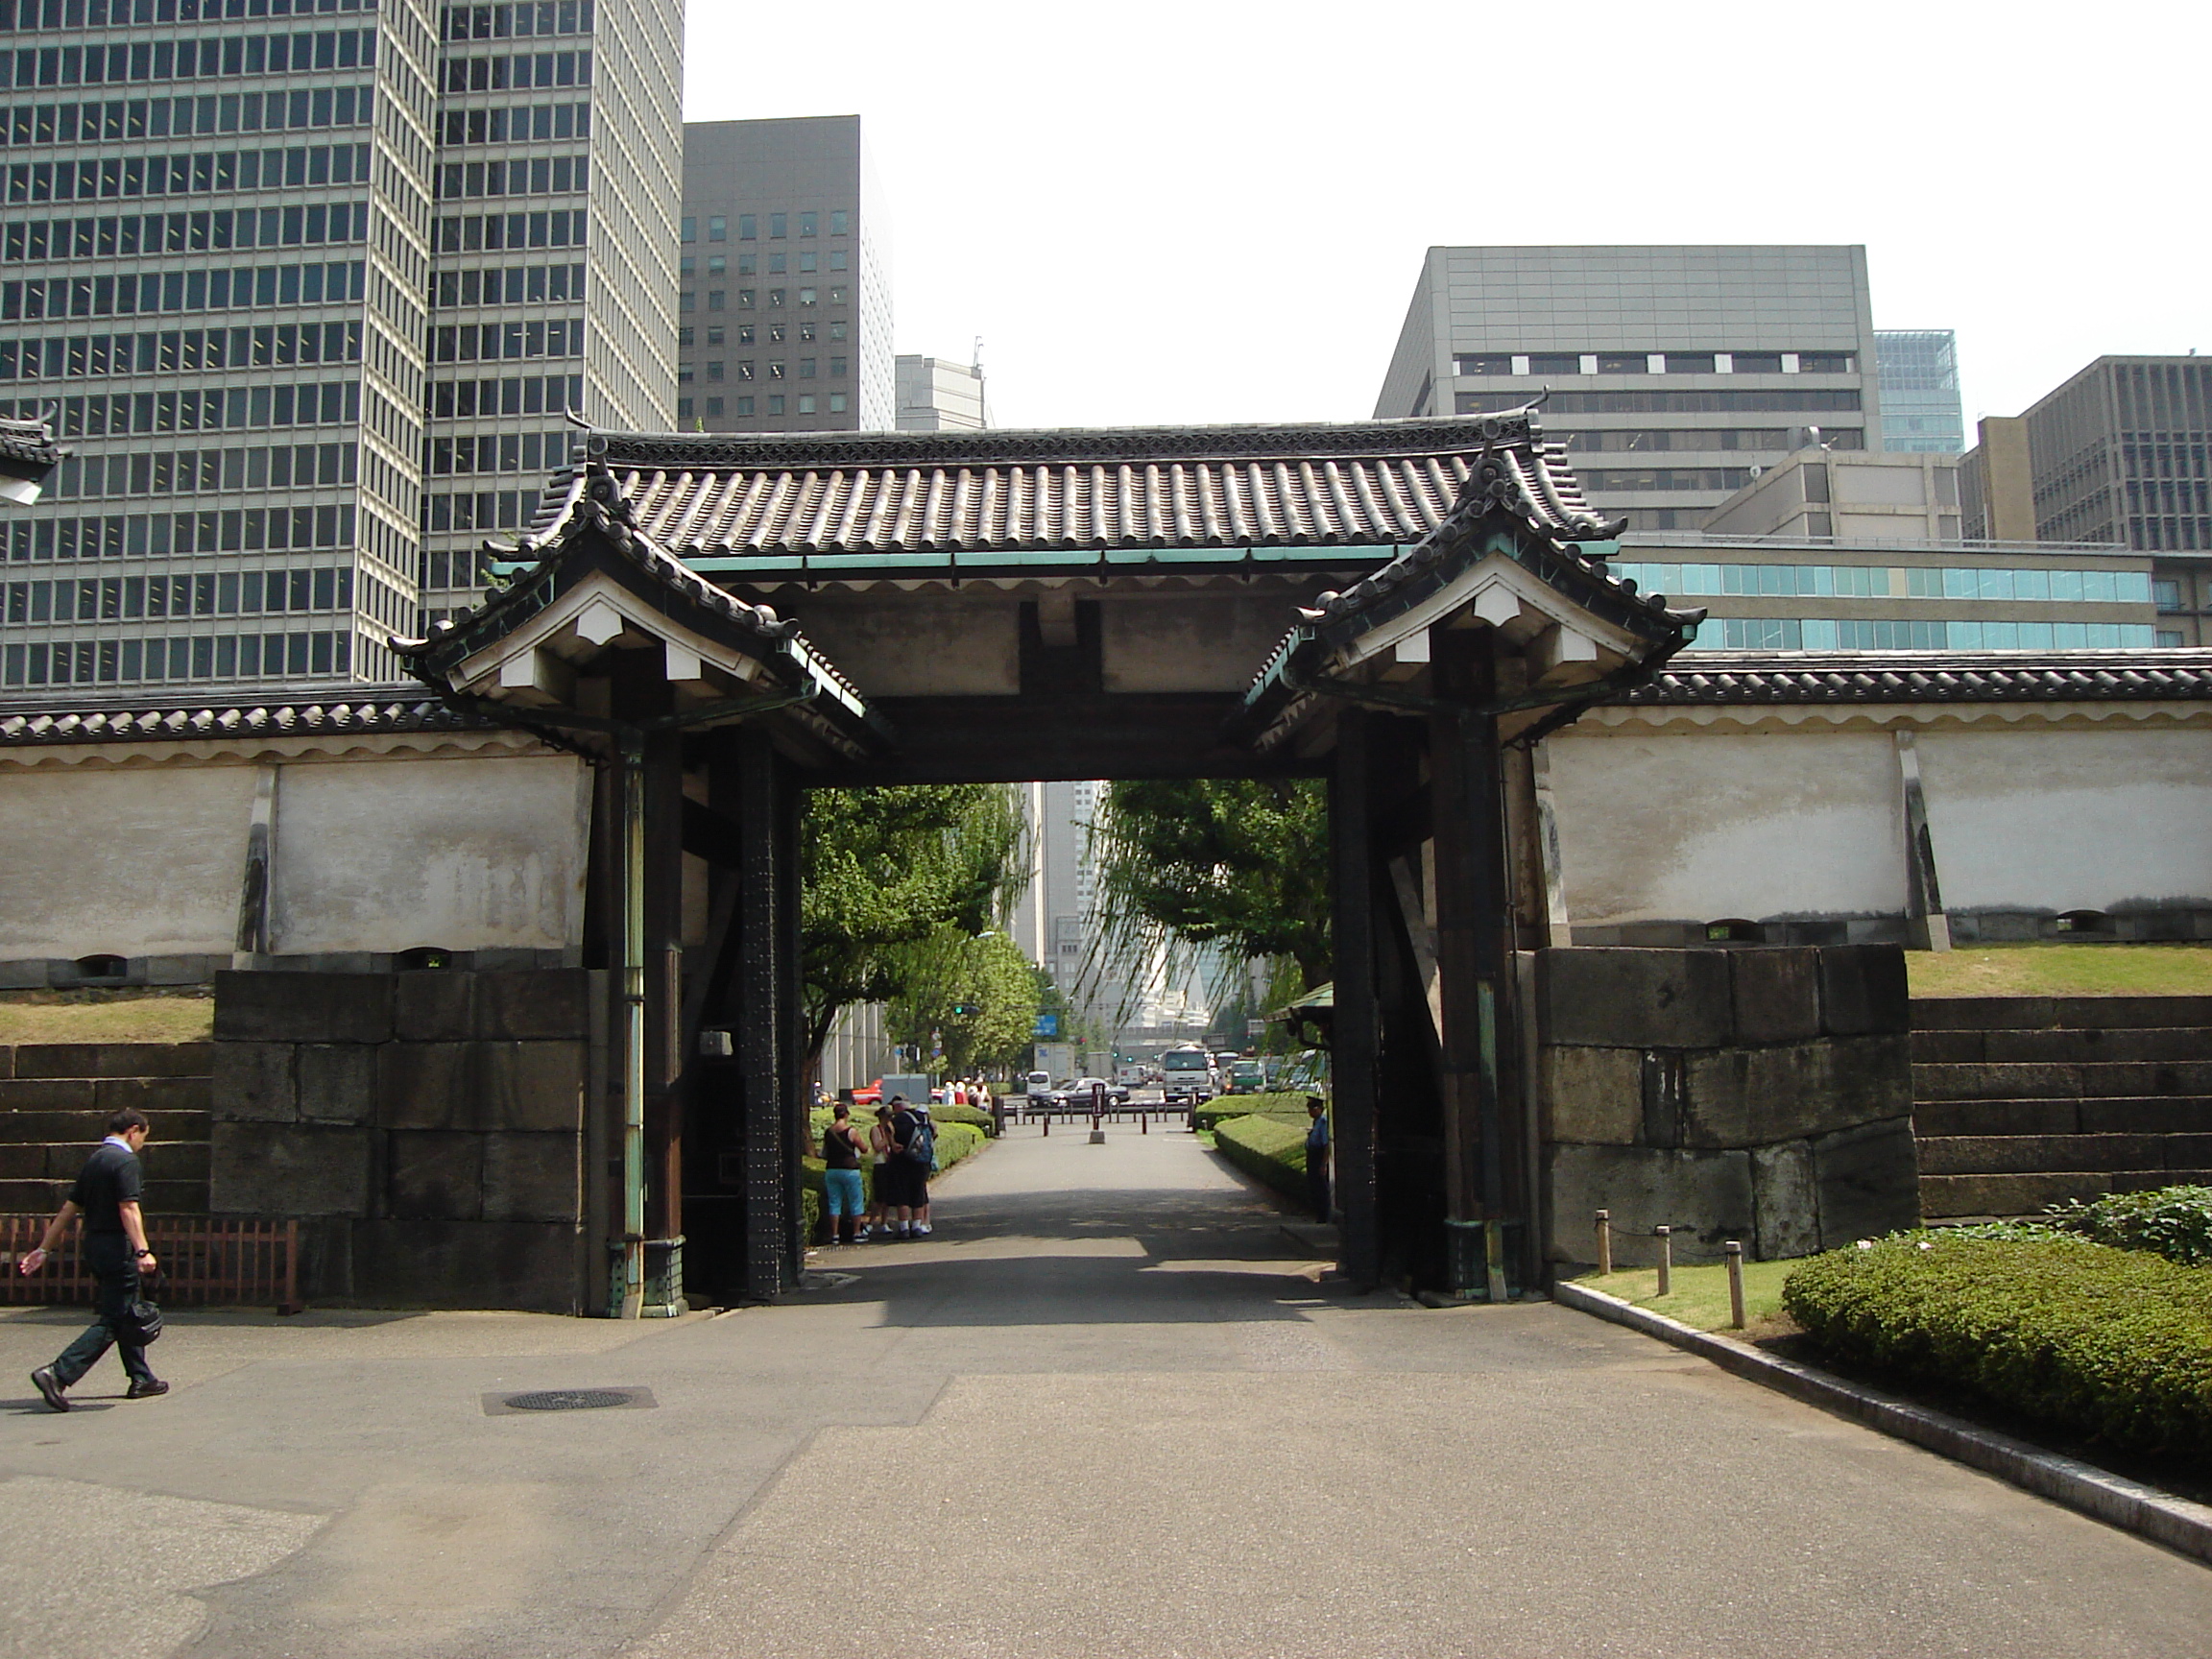 a view through the entry gate to the city buildings outside